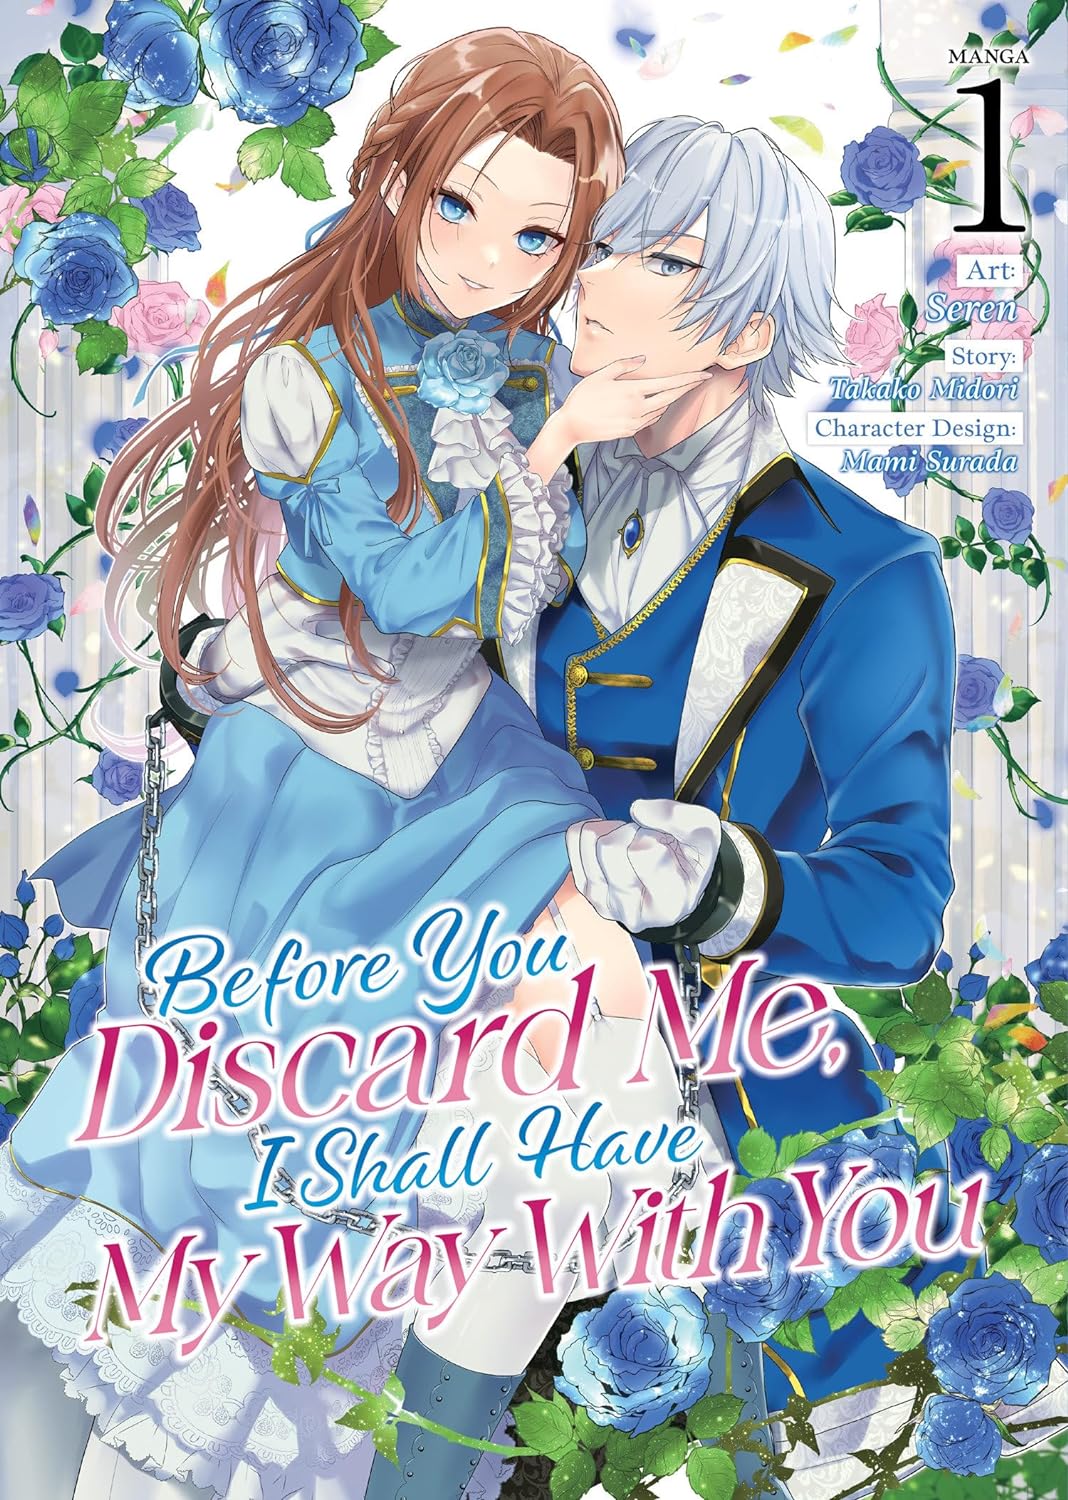 Before You Discard Me, I Shall Have My Way with You (Manga) Vol. 01